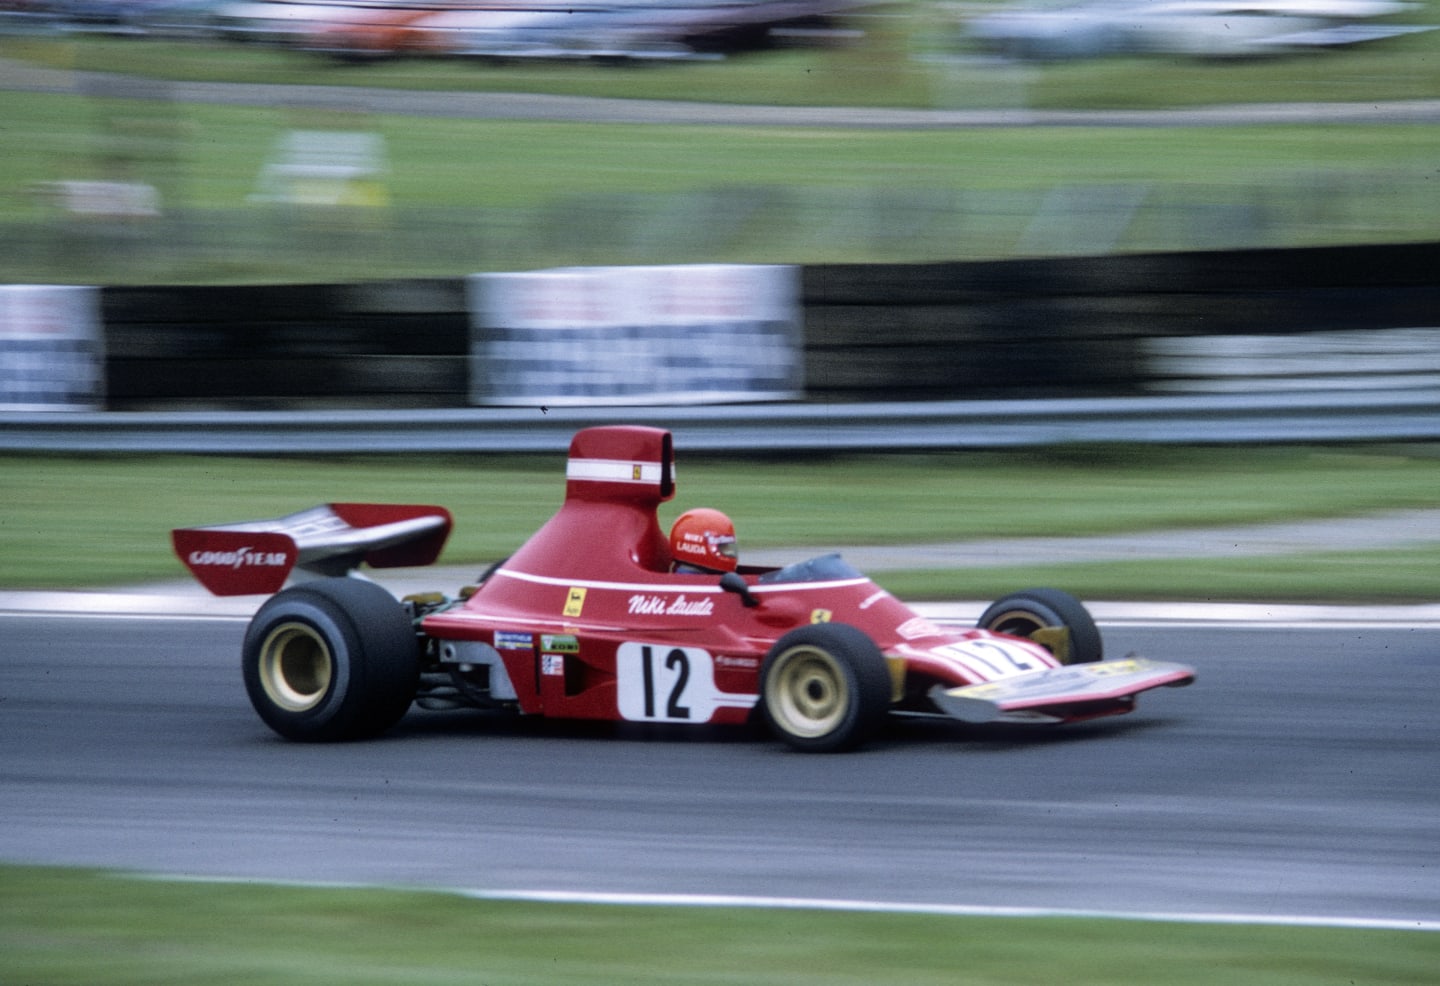 BRANDS HATCH, ENGLAND - JULY 01:  Austrian F1 racing driver Niki Lauda in action at Brands Hatch on